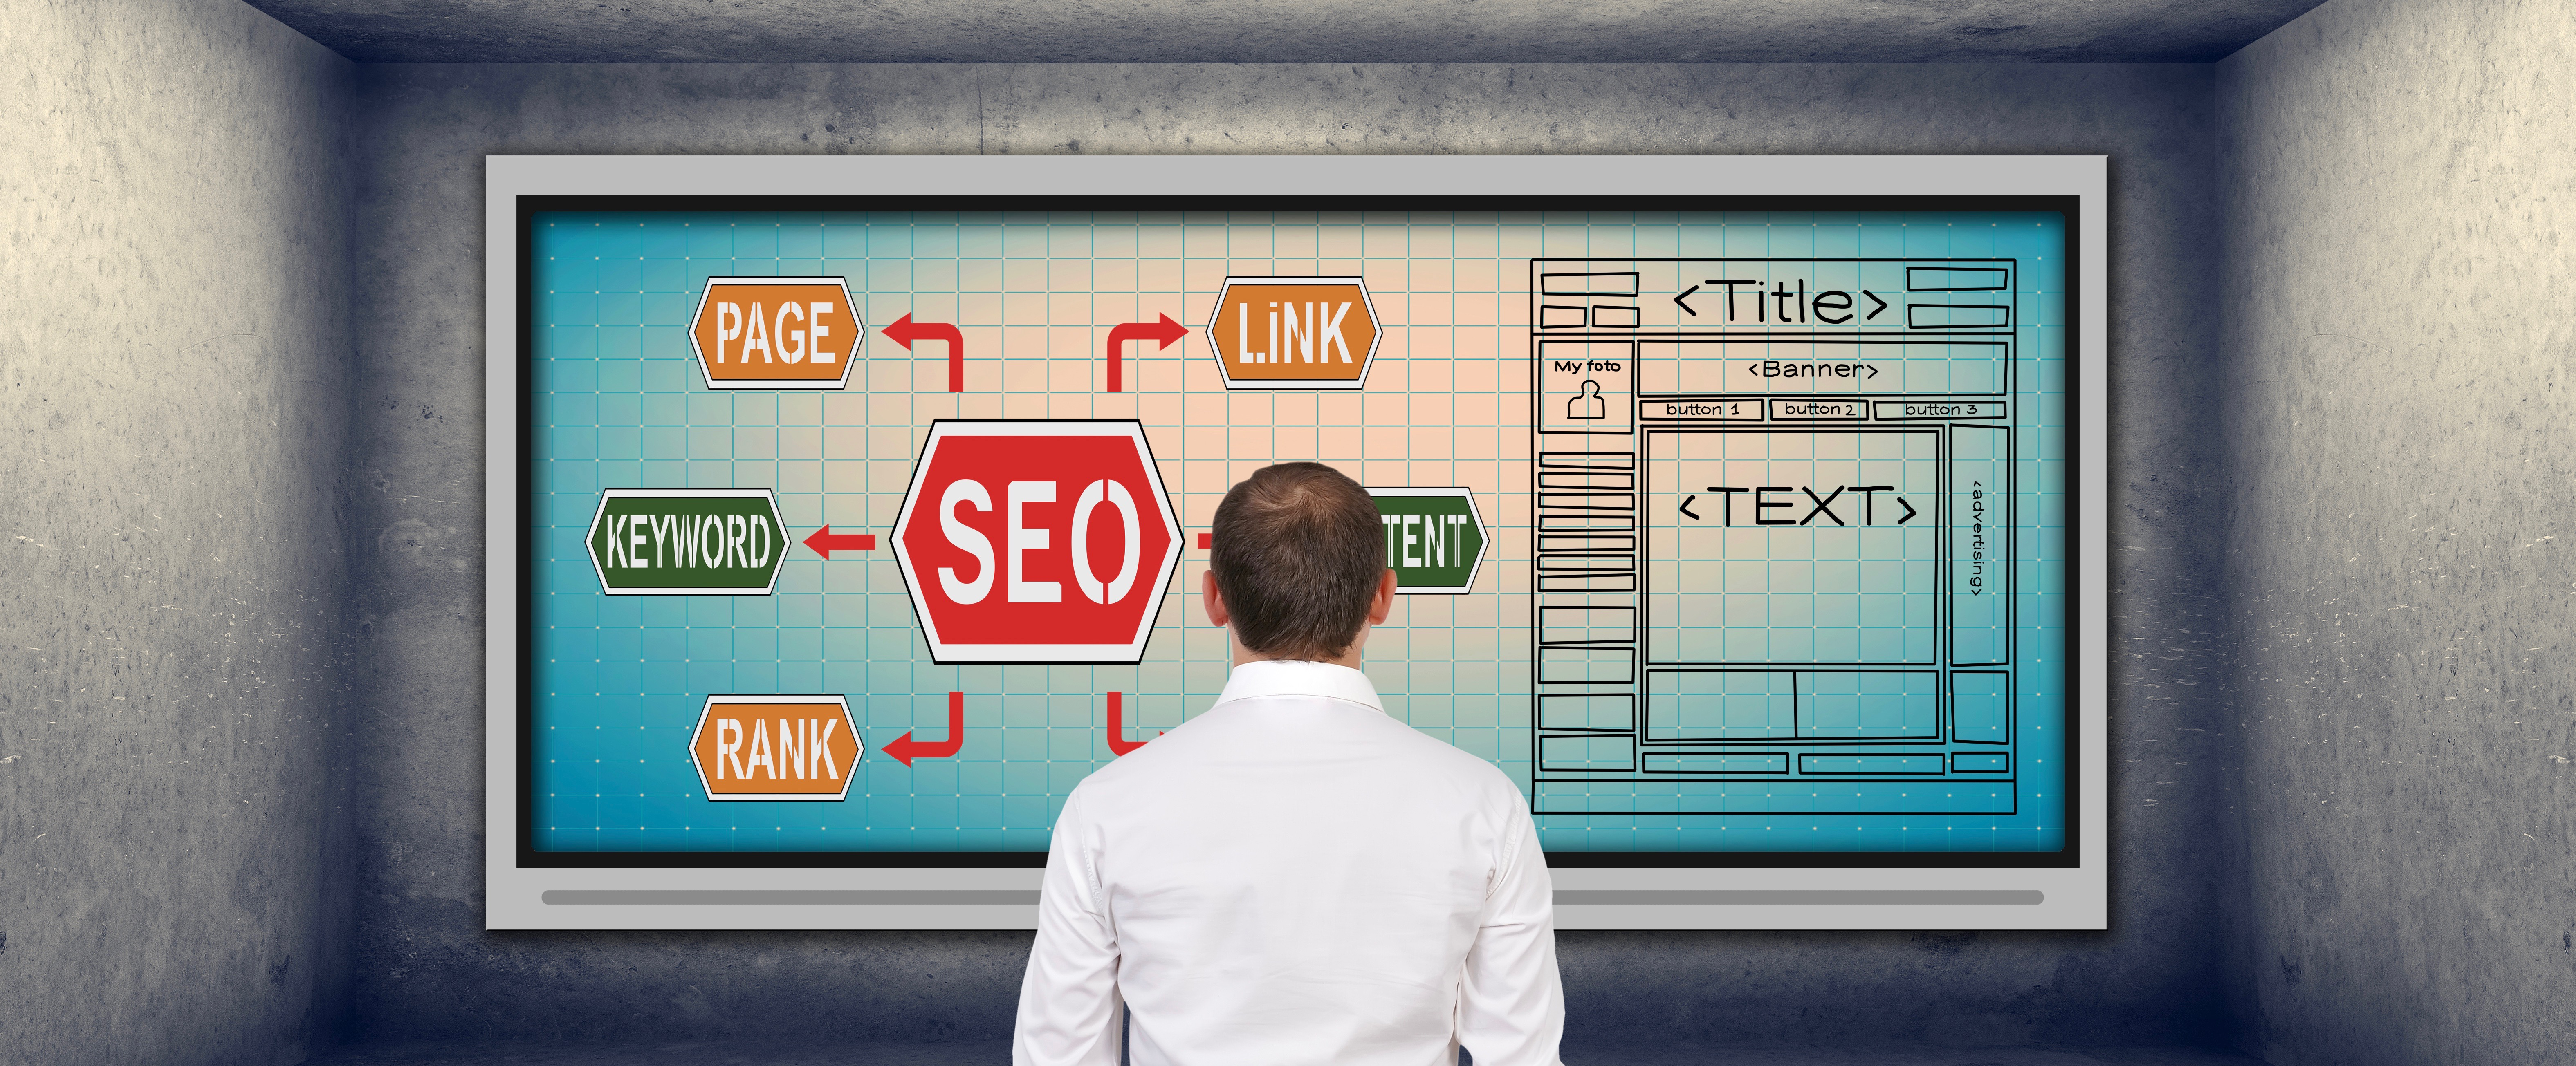 A Brief History of Search & SEO